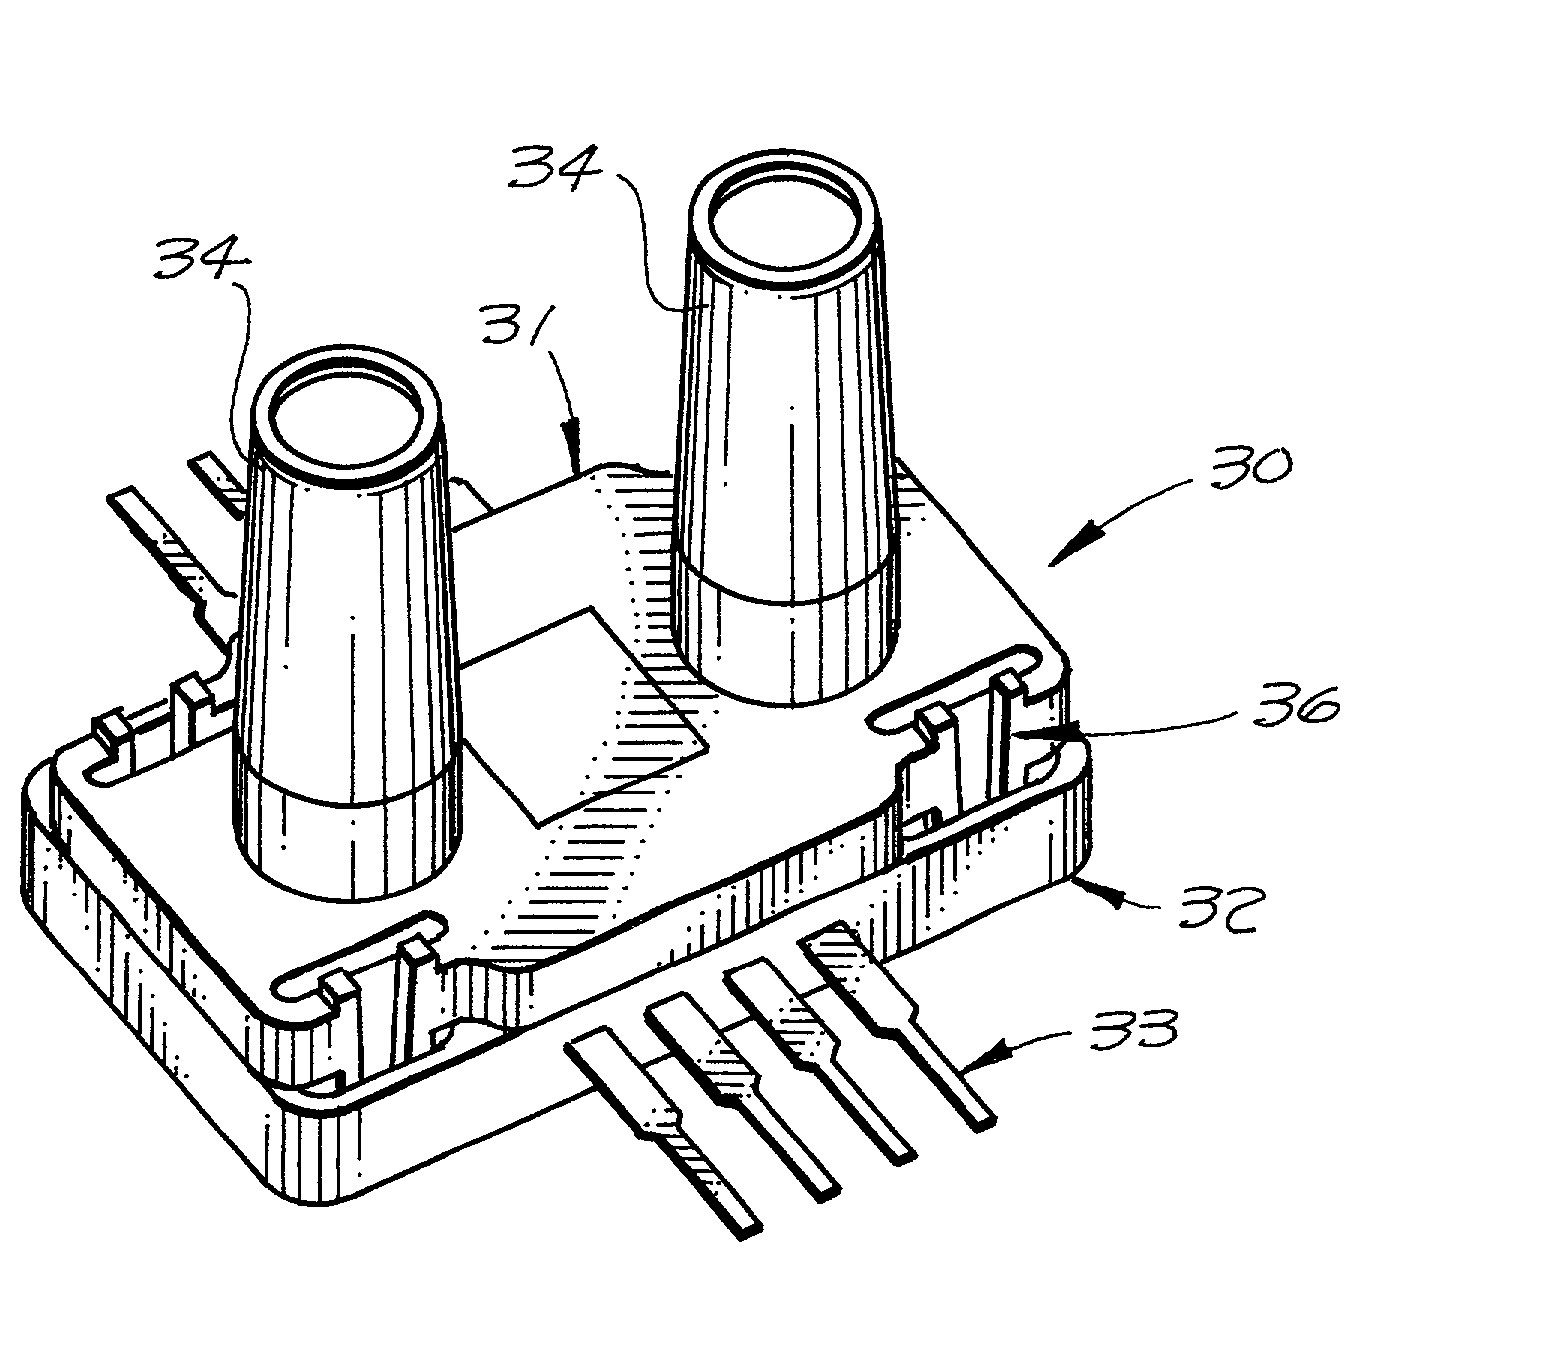 System for sensing the motion or pressure of a fluid